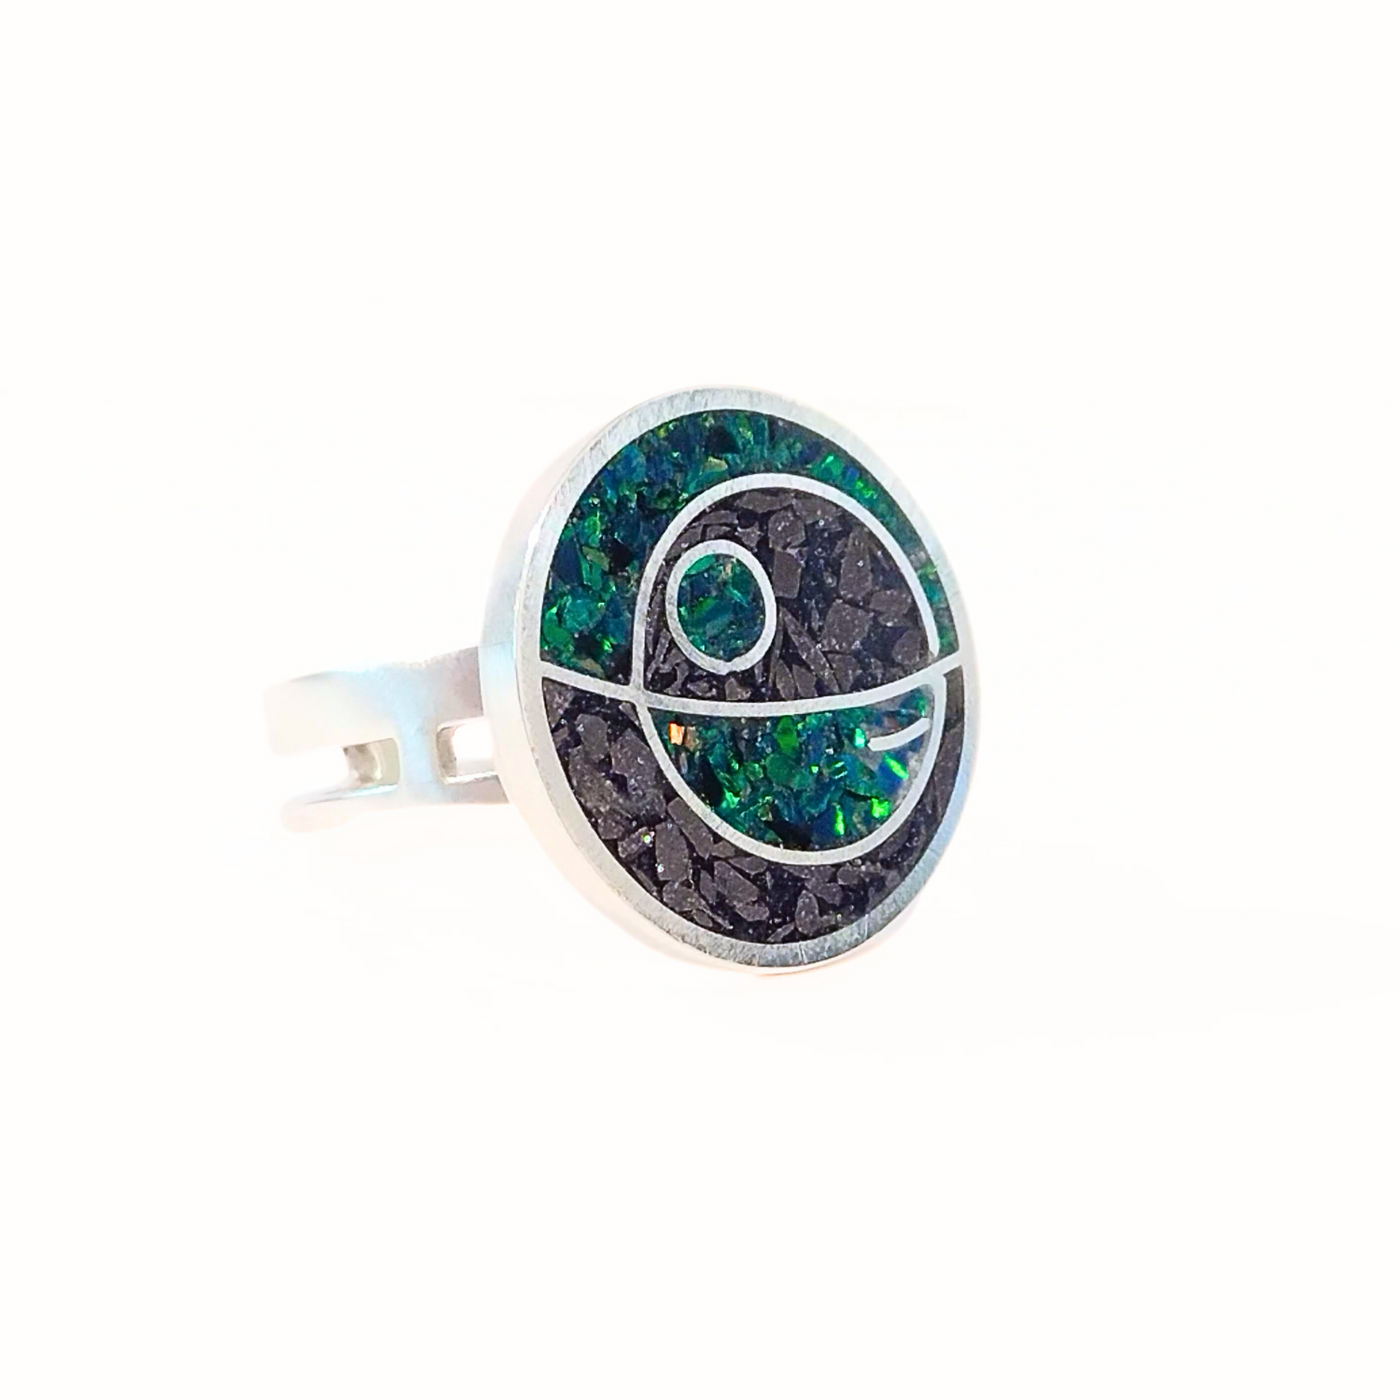 JSD-2047 Inlay Cocktail Ring "Death Star" (8.5)